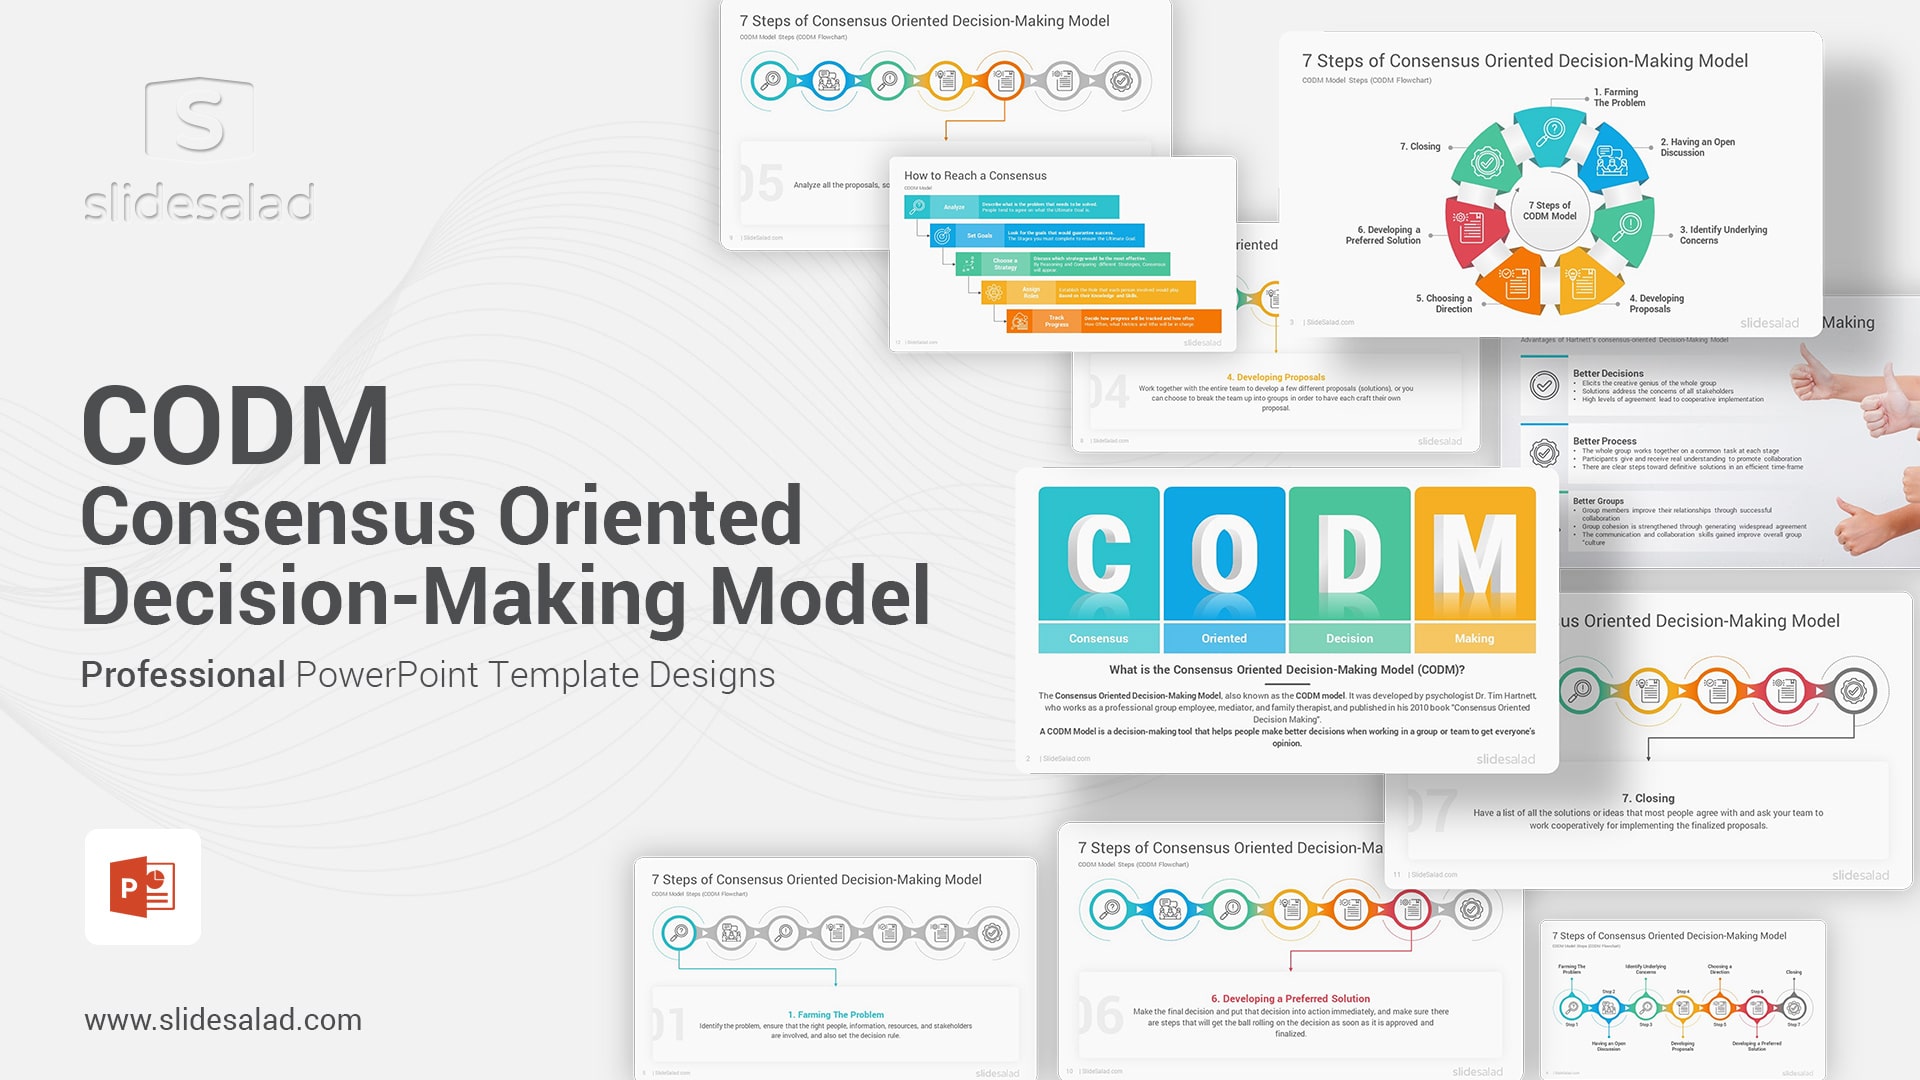 CODM Model PowerPoint Template - Make Better Group Decisions using This Premium PPT Presentation Template Designs